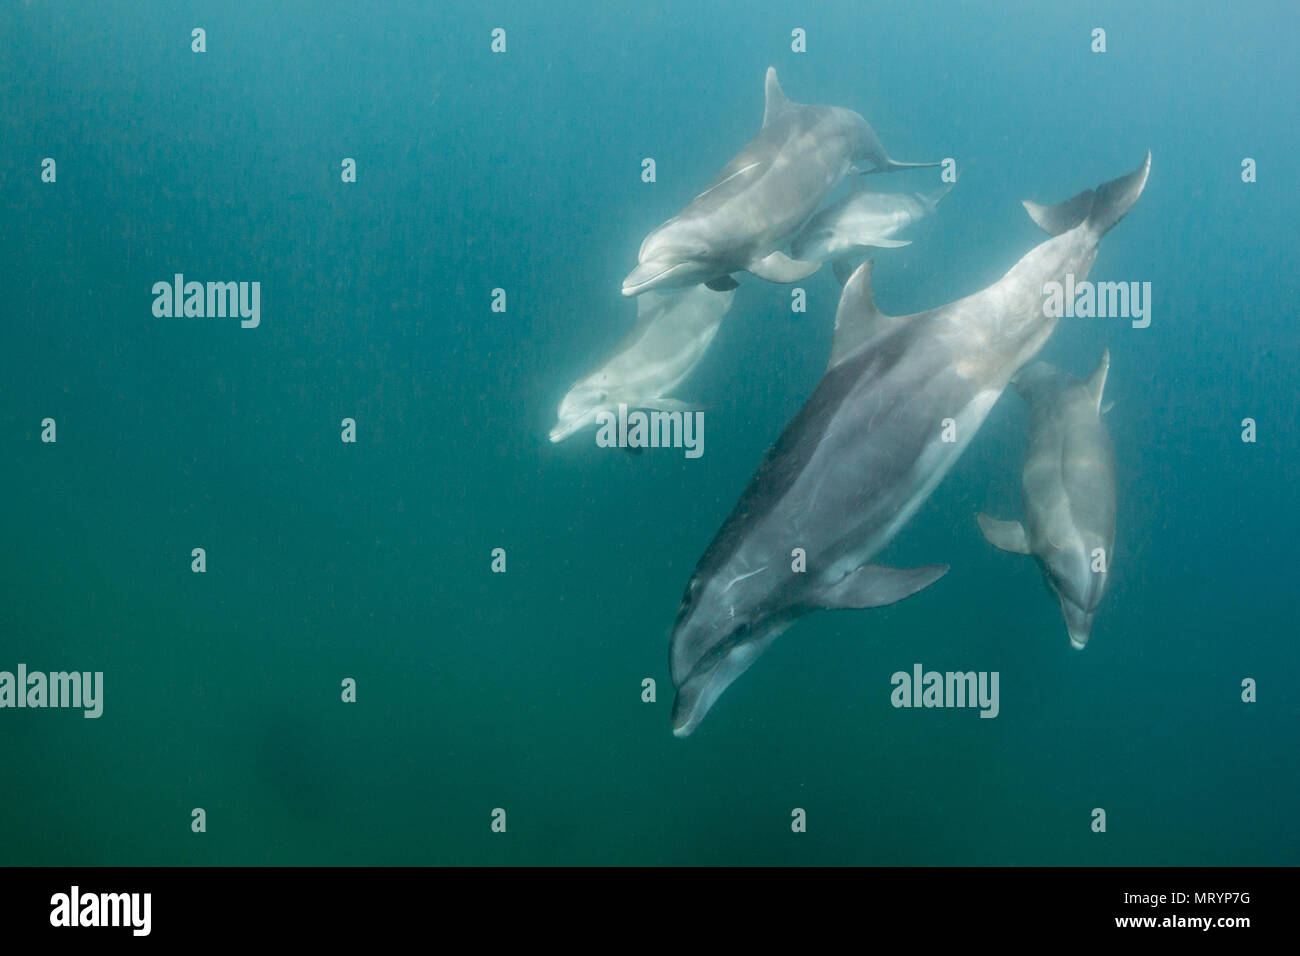 A family of bottlenose dolphins (Tursiops truncatus) swims by in the bay of La Paz, Mexico. Stock Photo